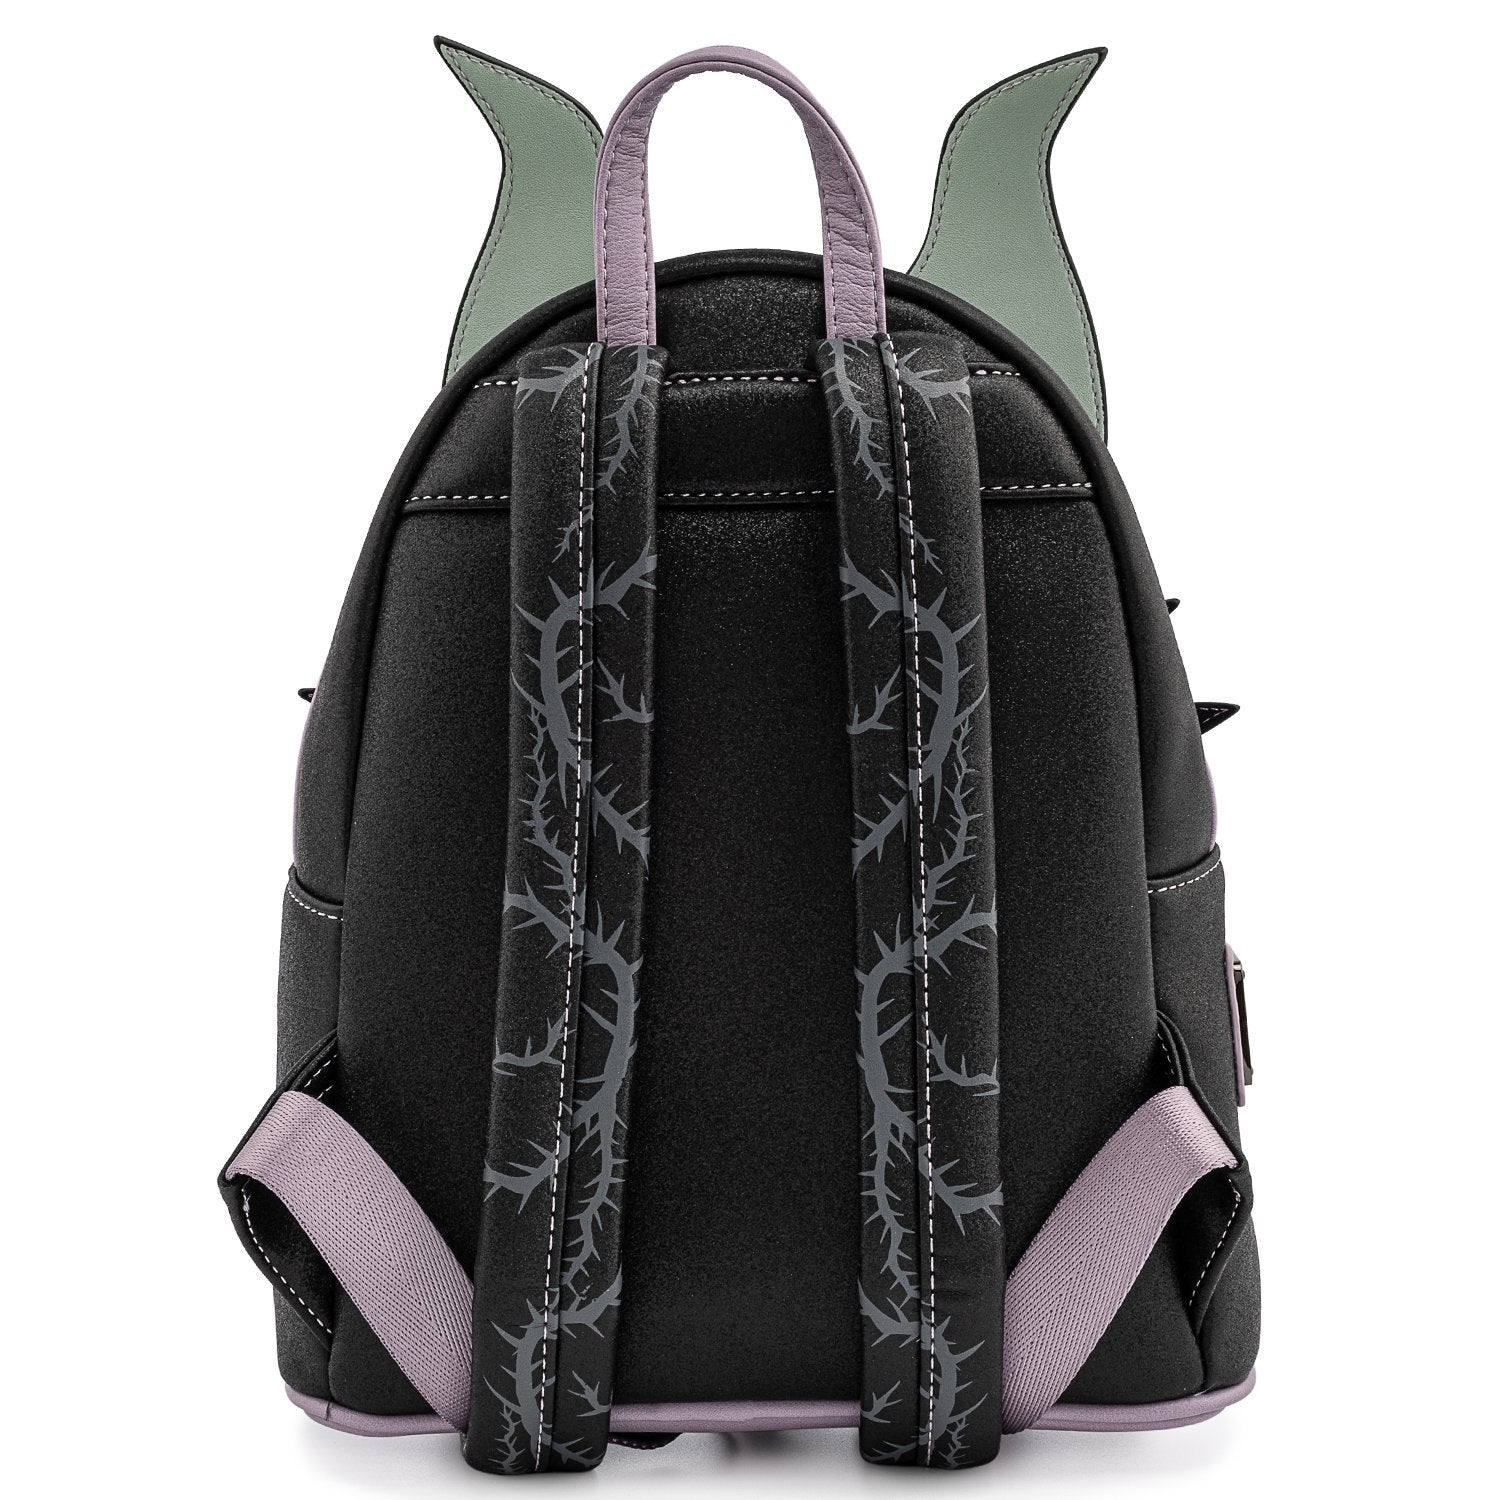 Maleficent Loungefly Mini Backpack – Mousesteps